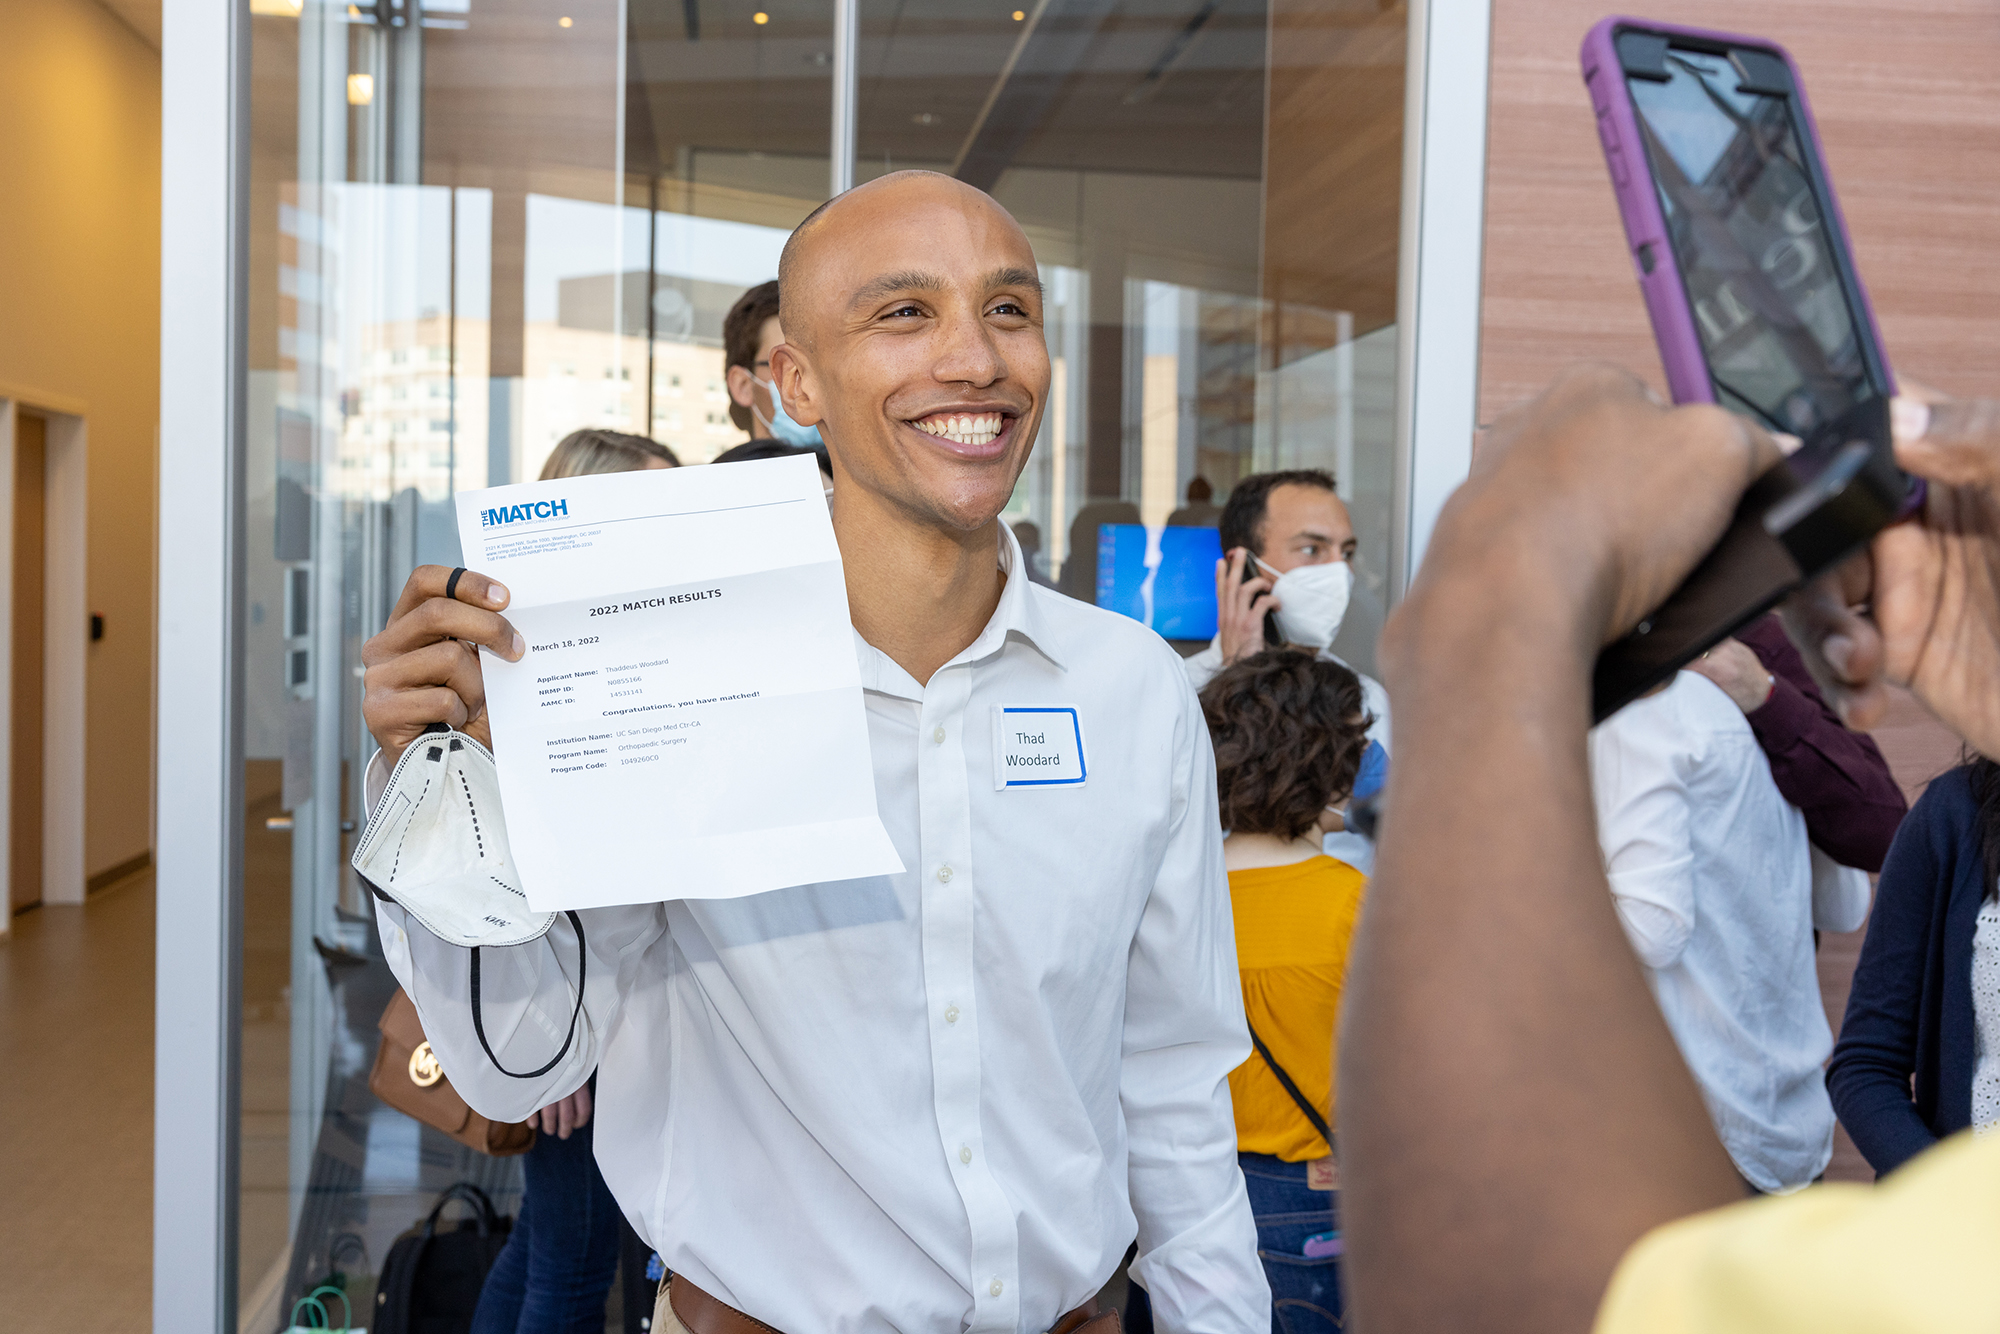 Penn Med student Theo Woodard smiles while holding up their Match Day letter.